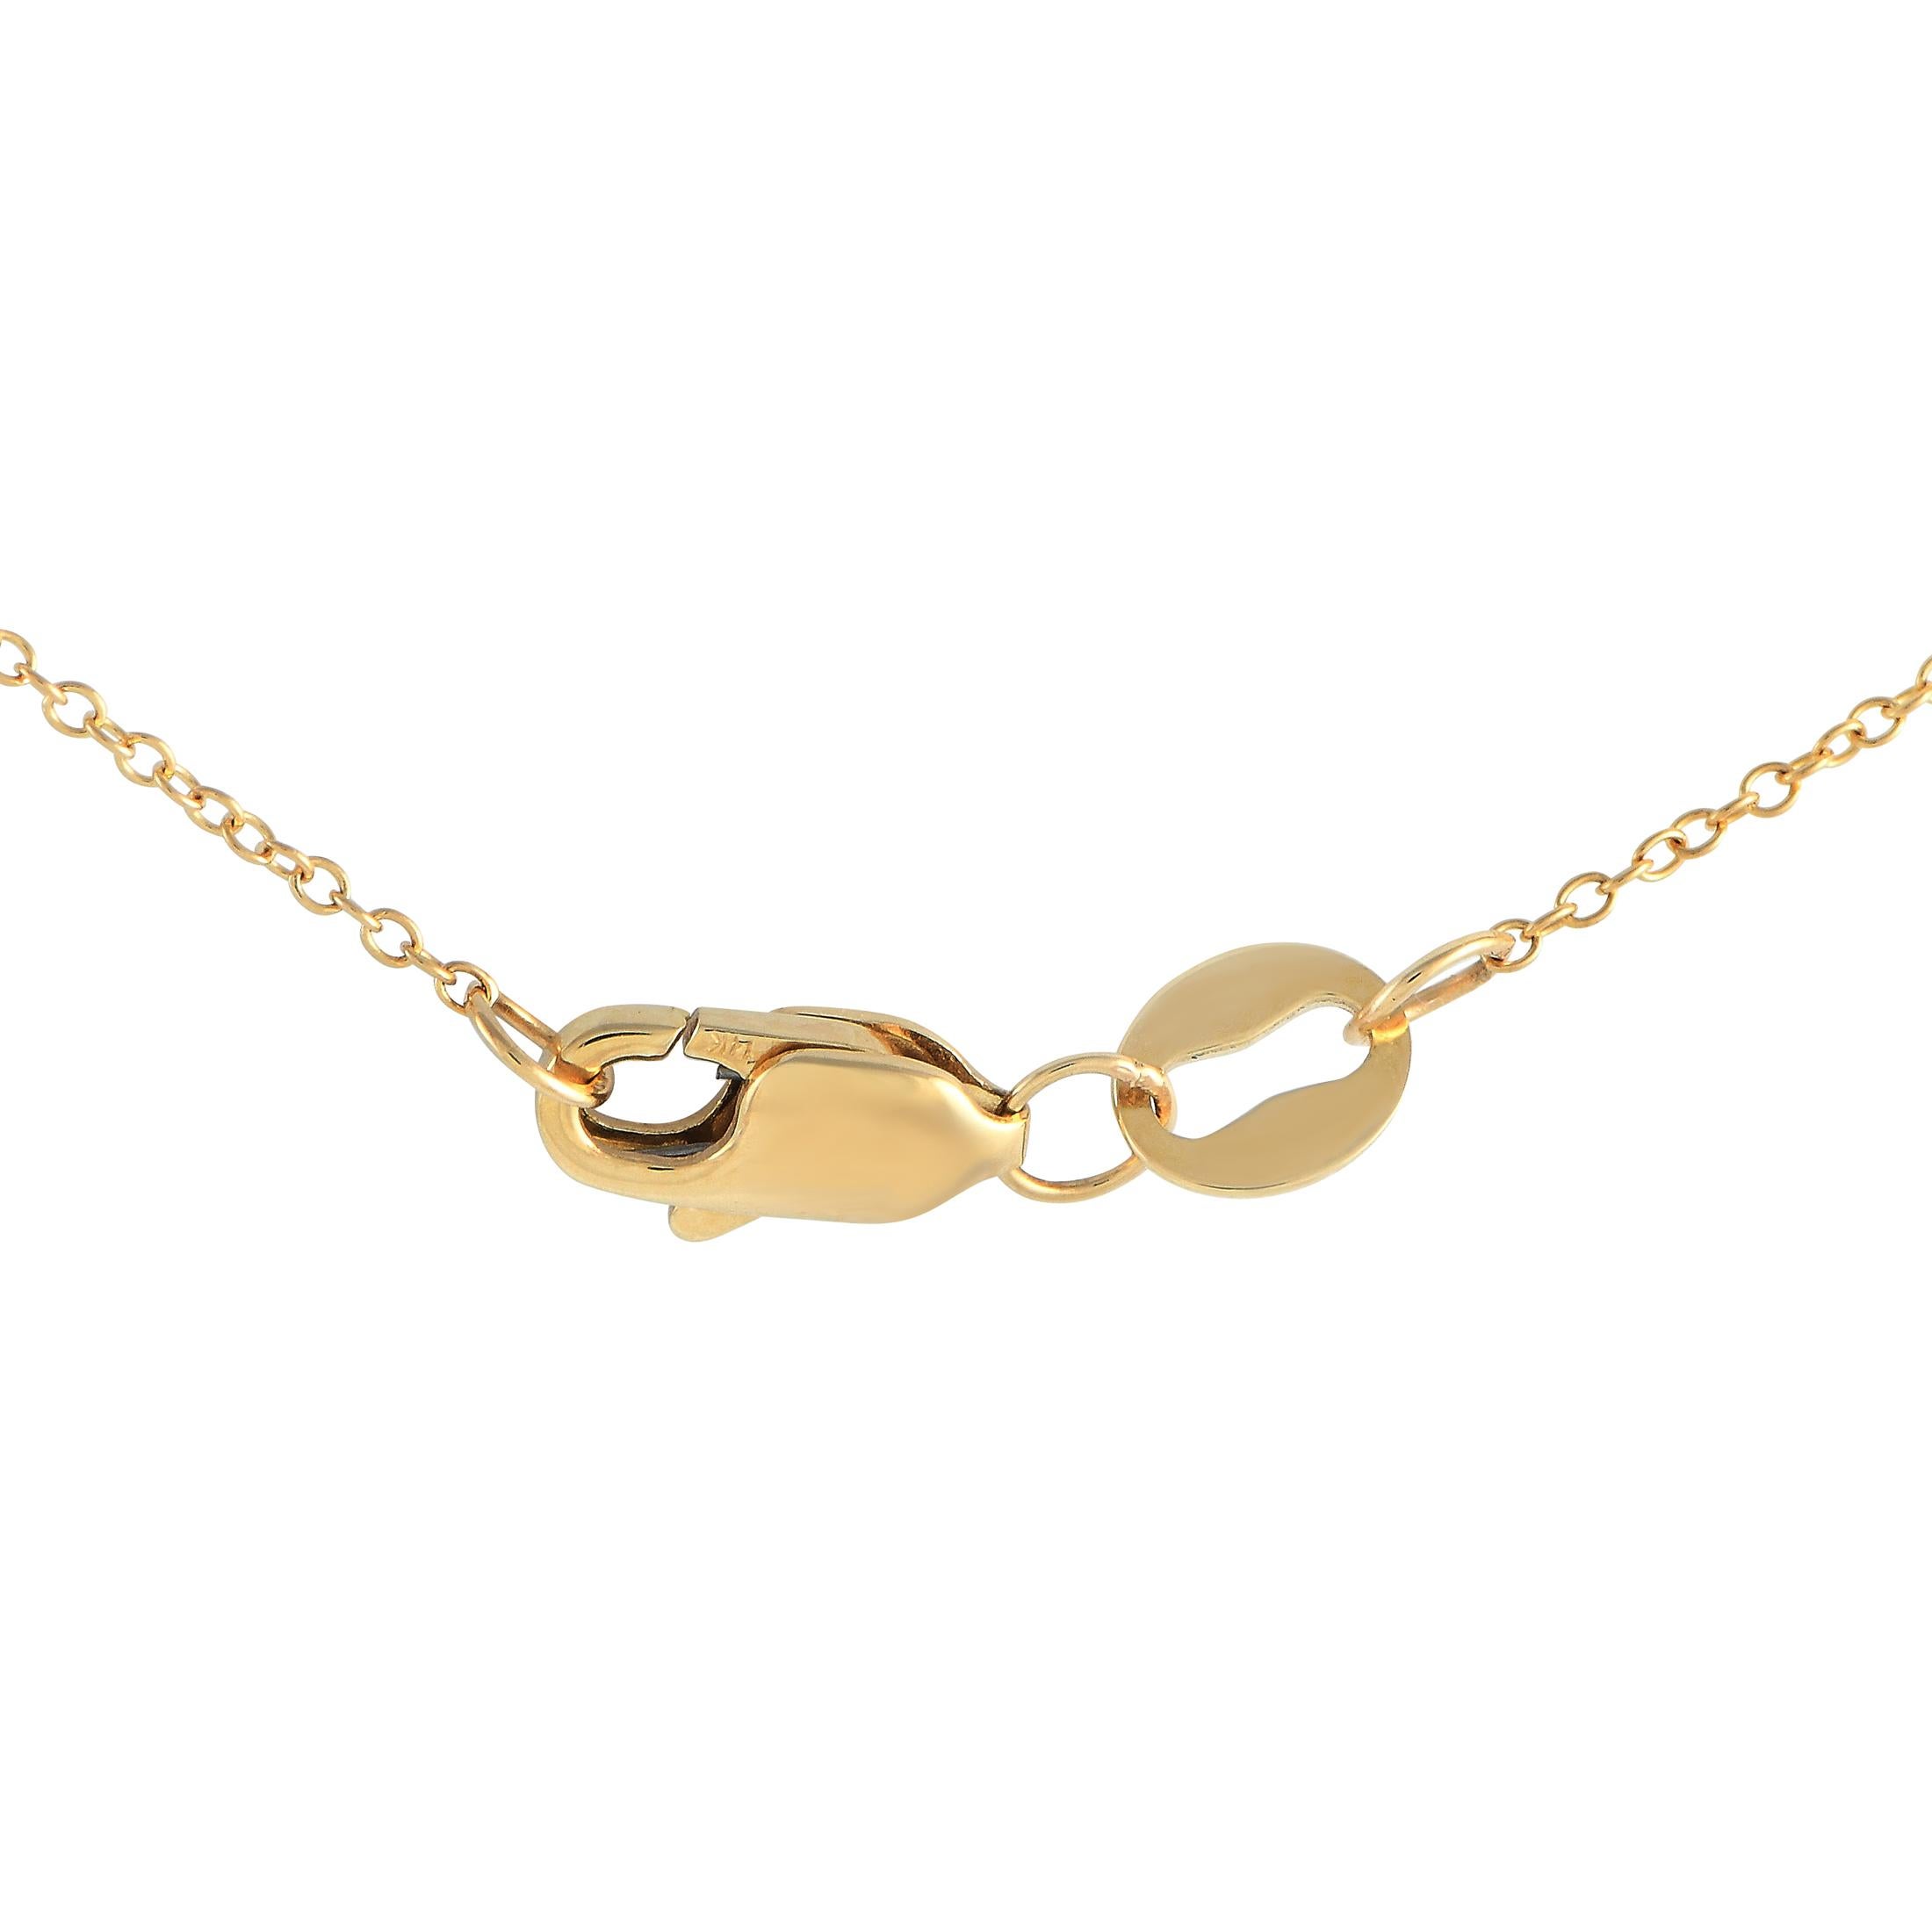 Give more personality to your everyday look with this minimalist diamond necklace. It comes with a 15.5\